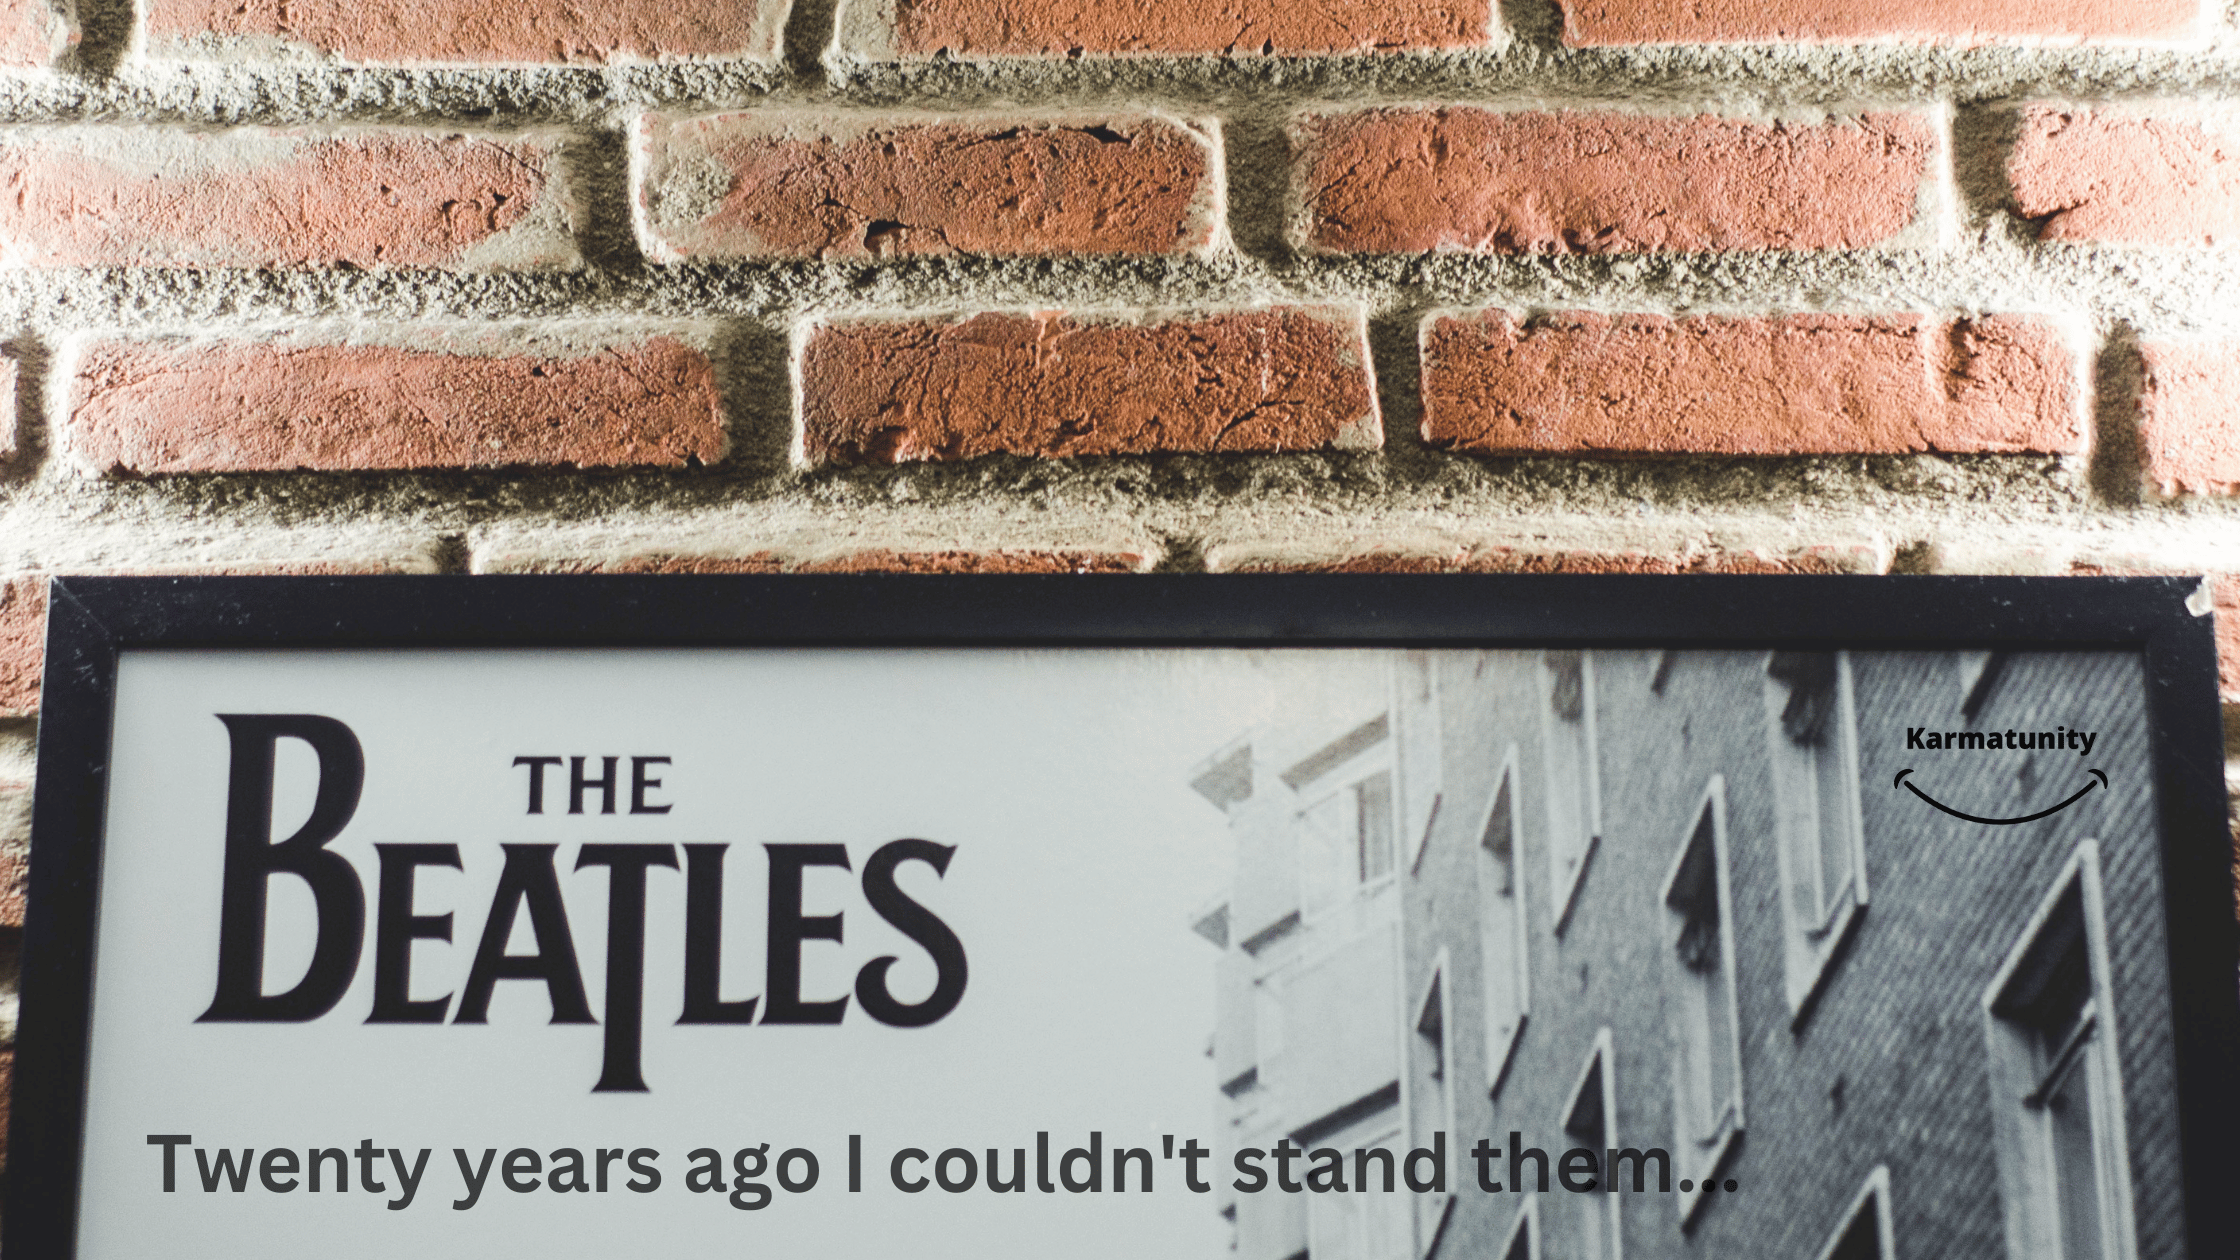 Twenty years ago I couldn’t stand The Beatles….now I appreciate them more than ever.